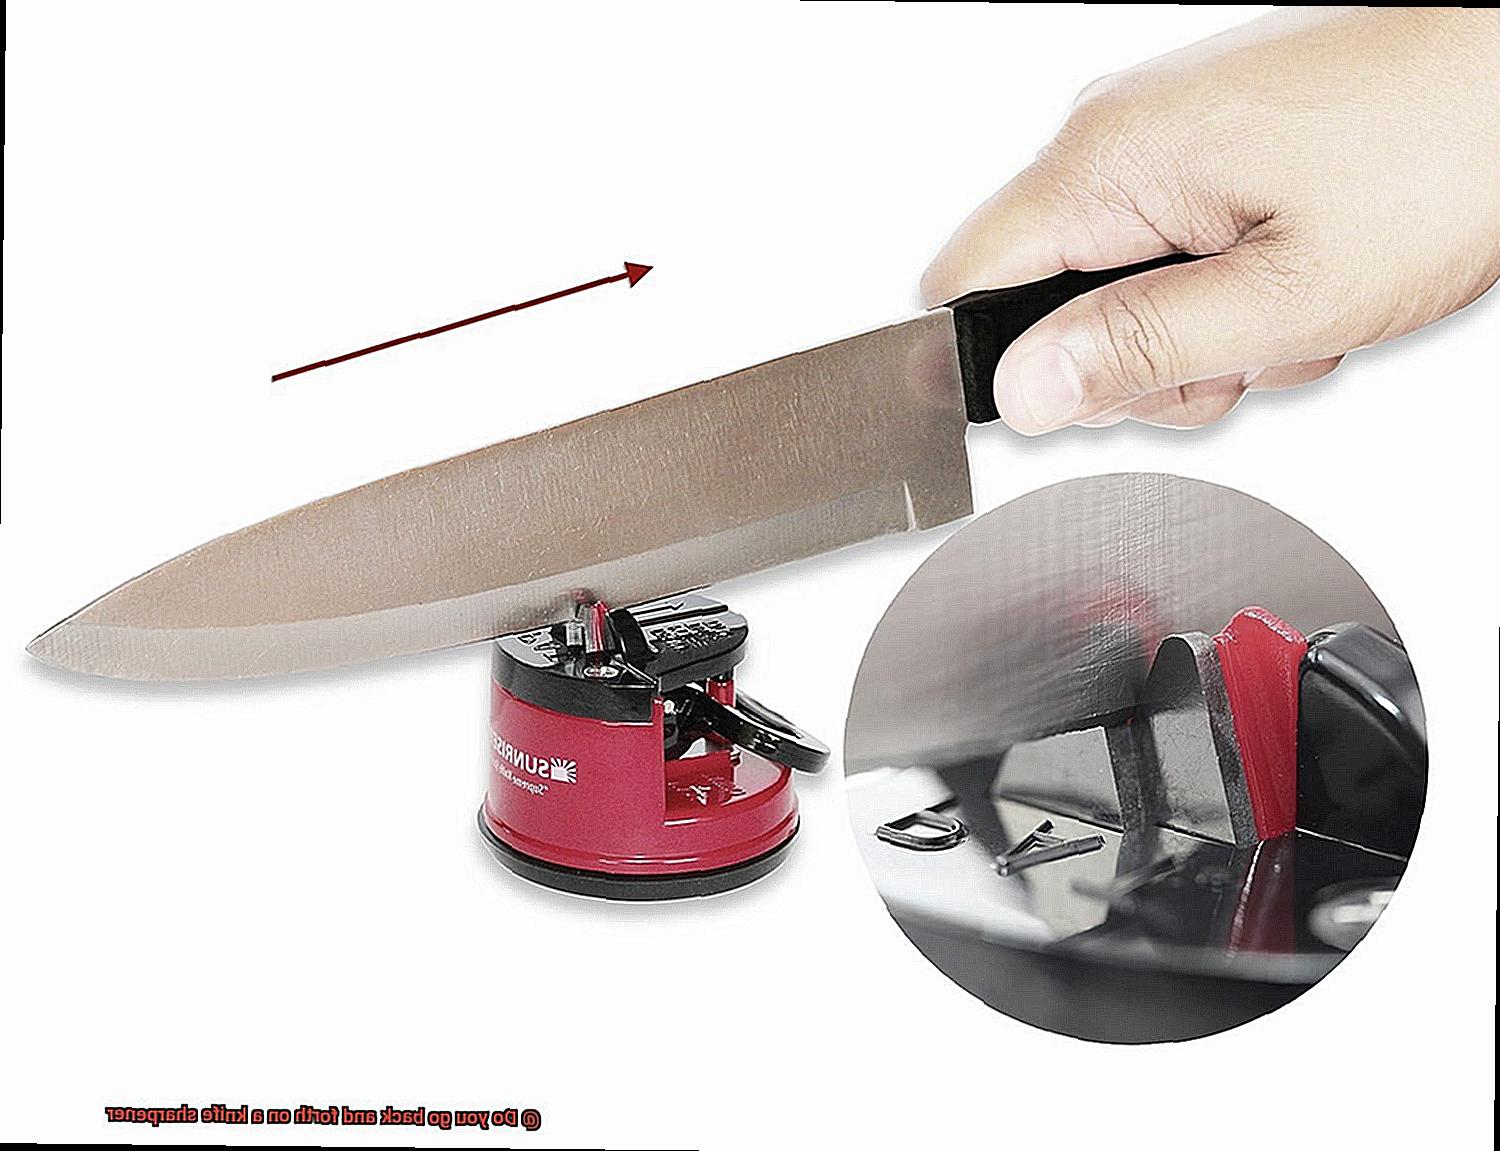 Do you go back and forth on a knife sharpener-6